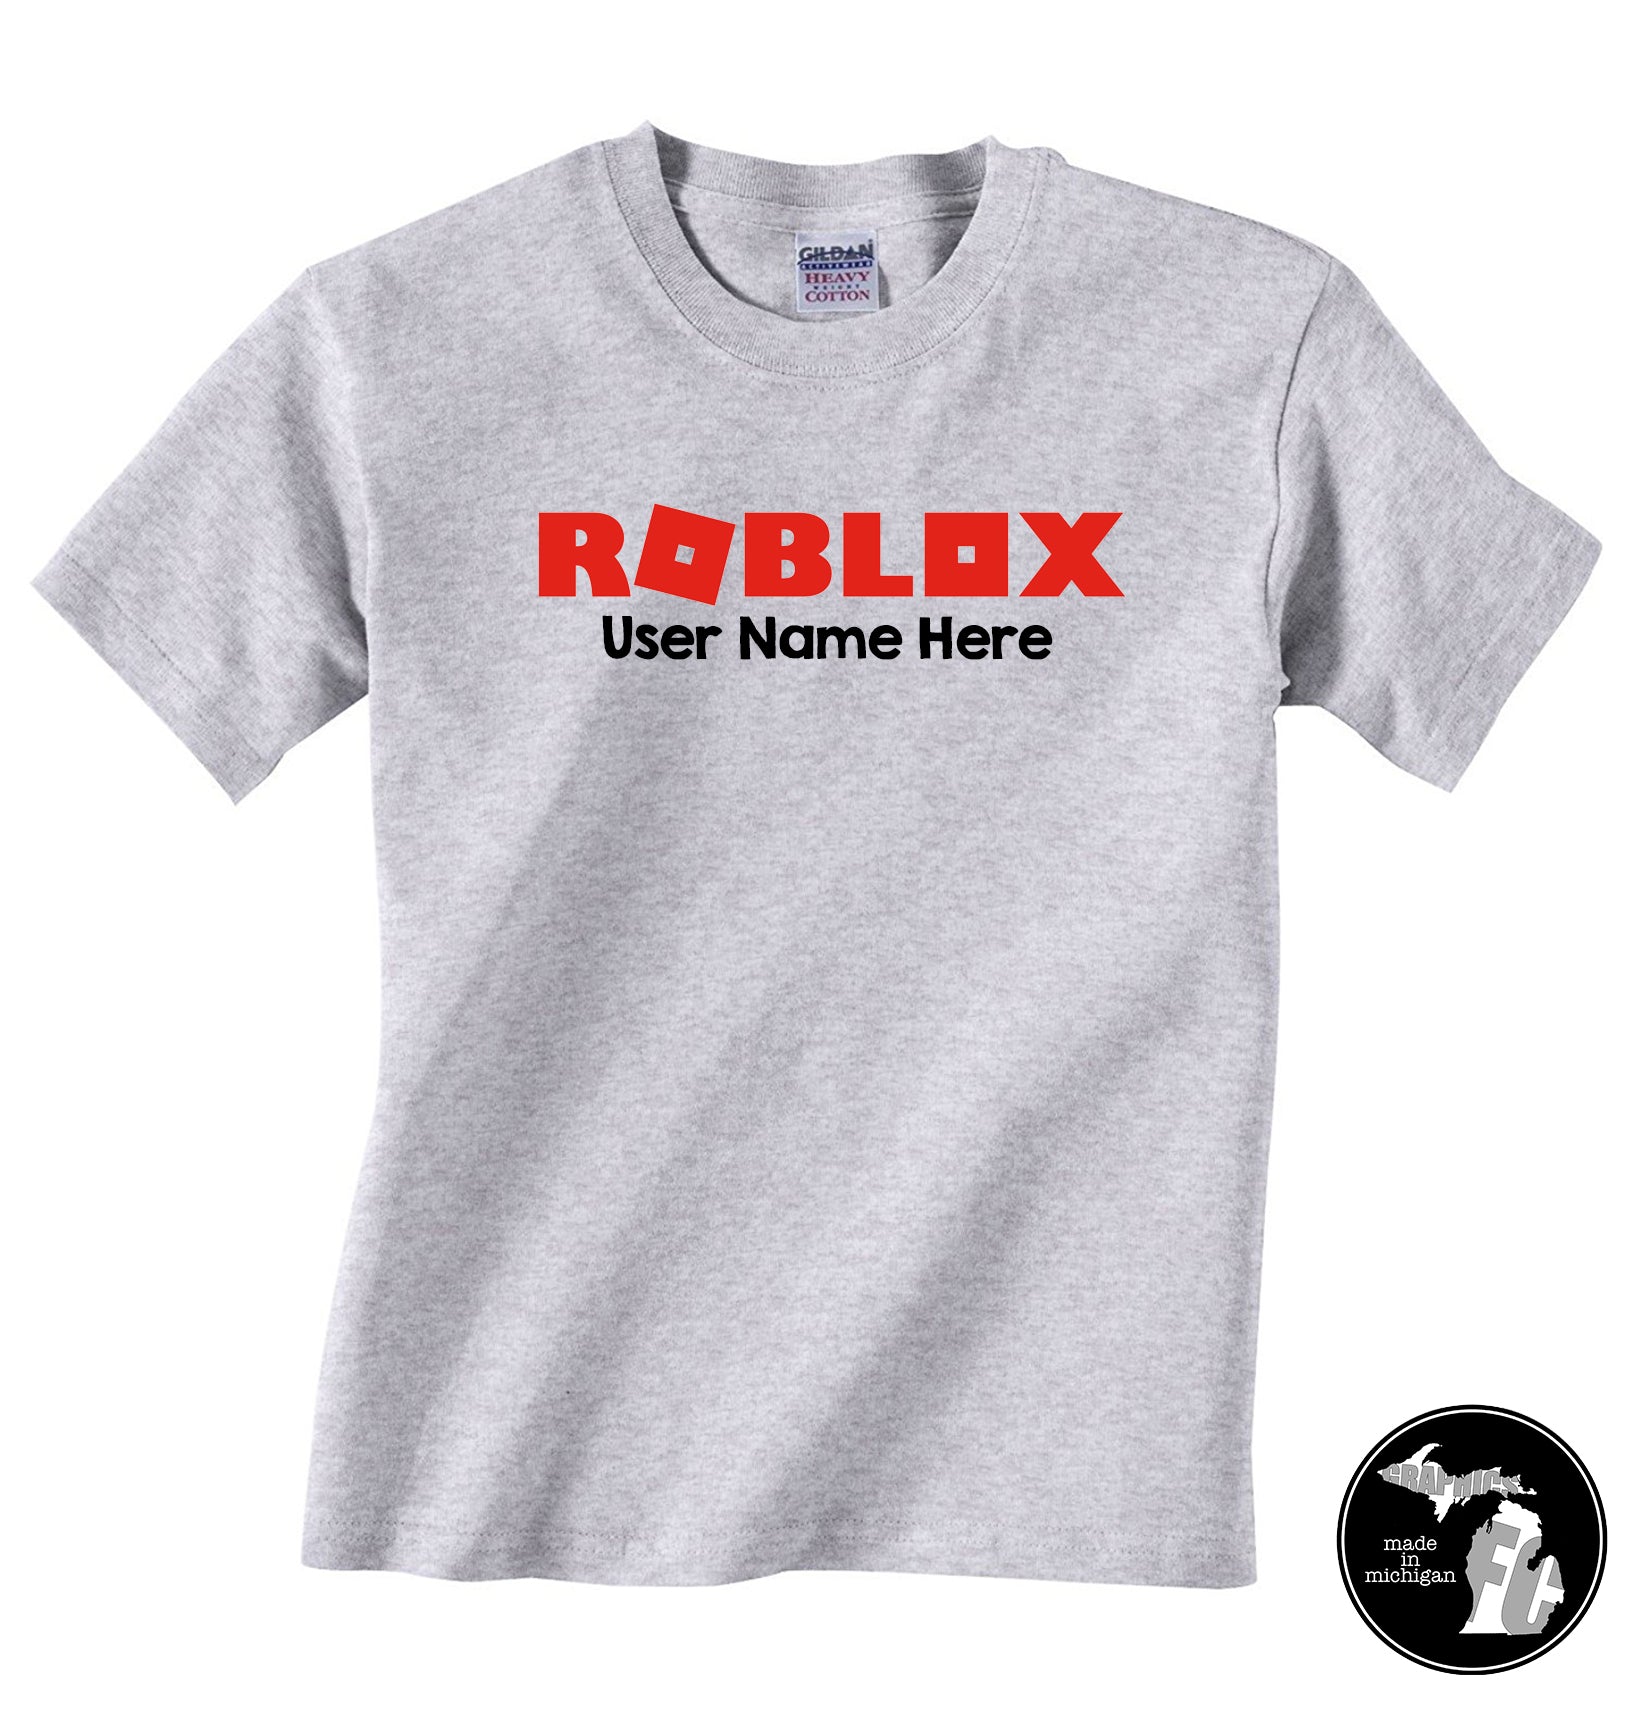 Roblox T Shirt With Personal User Name Kids Shirt Child Adults Furniture City Graphics - roblox shirt for kids